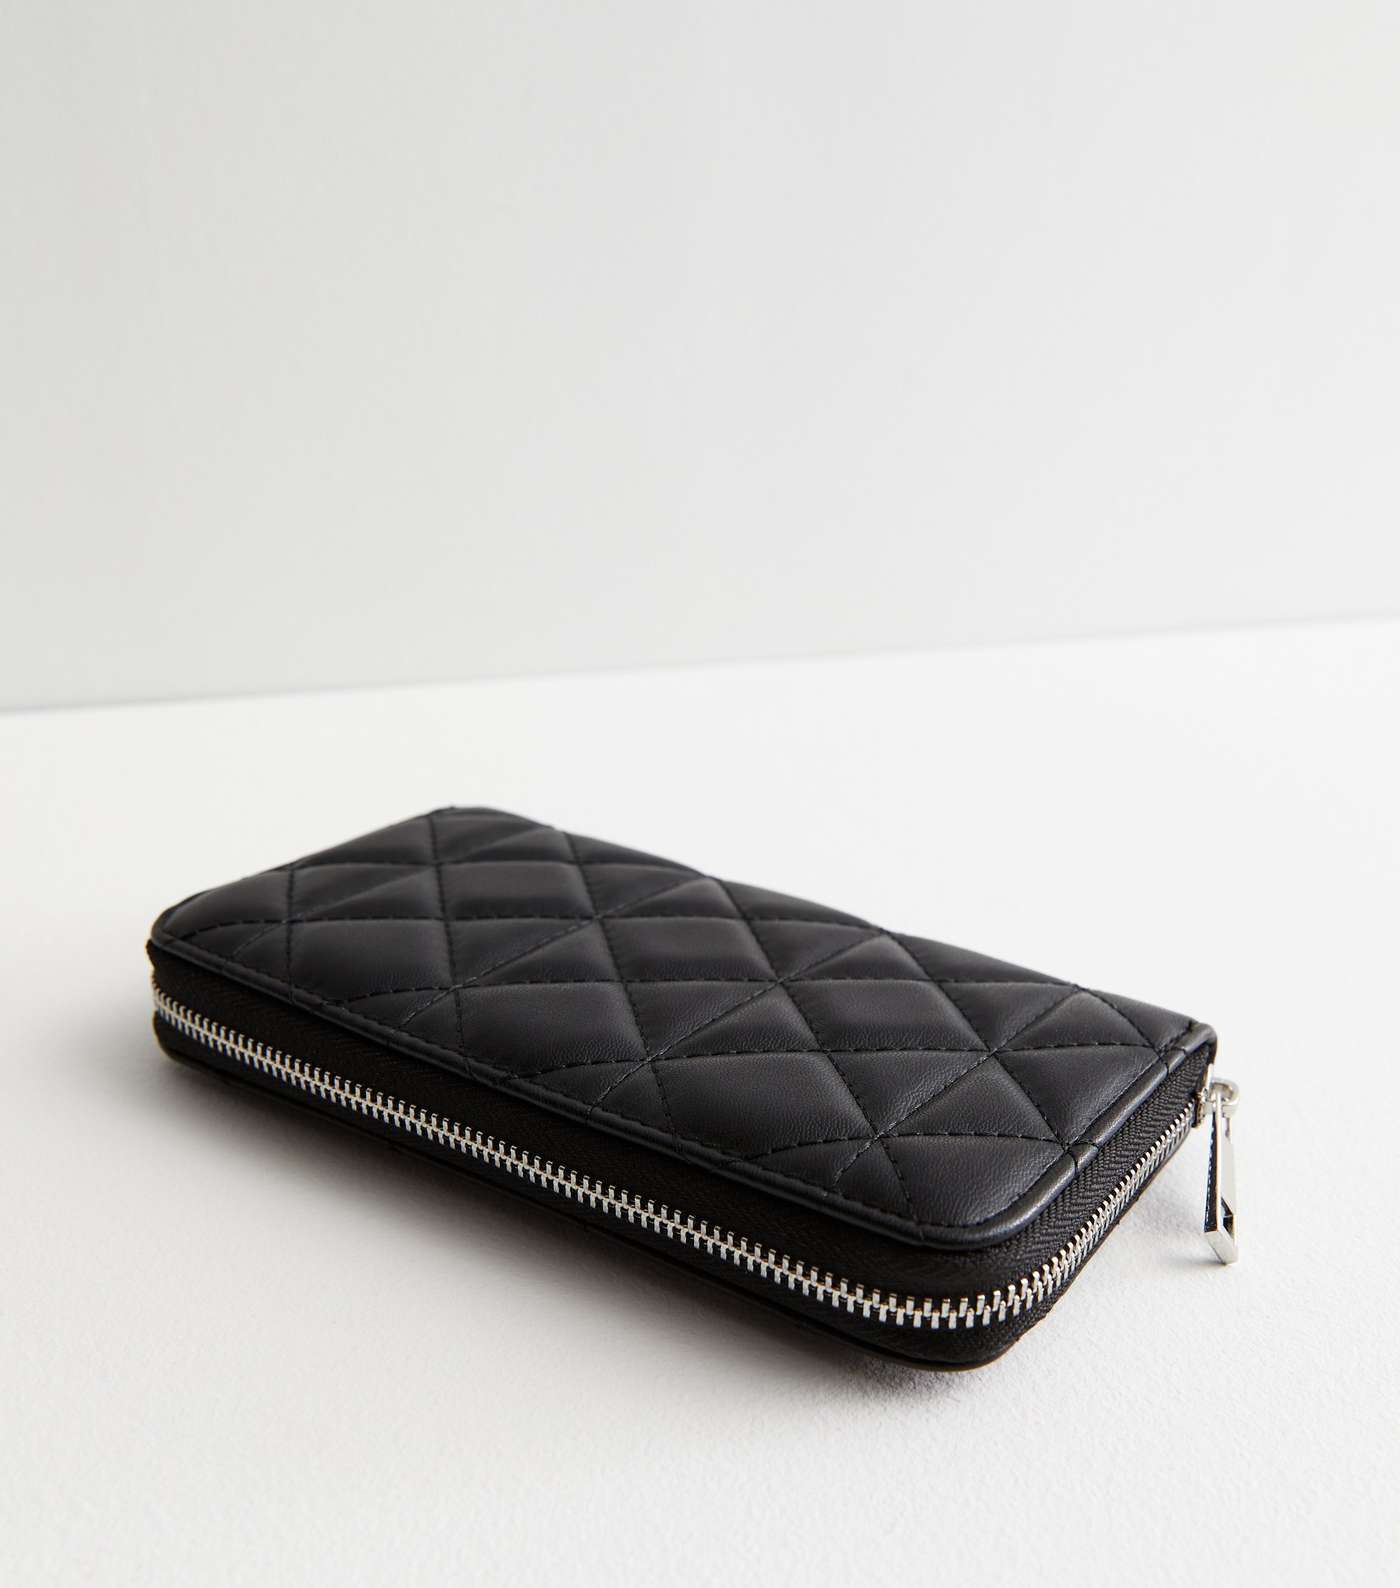 Black Quilted Leather-Look Large Purse Image 2